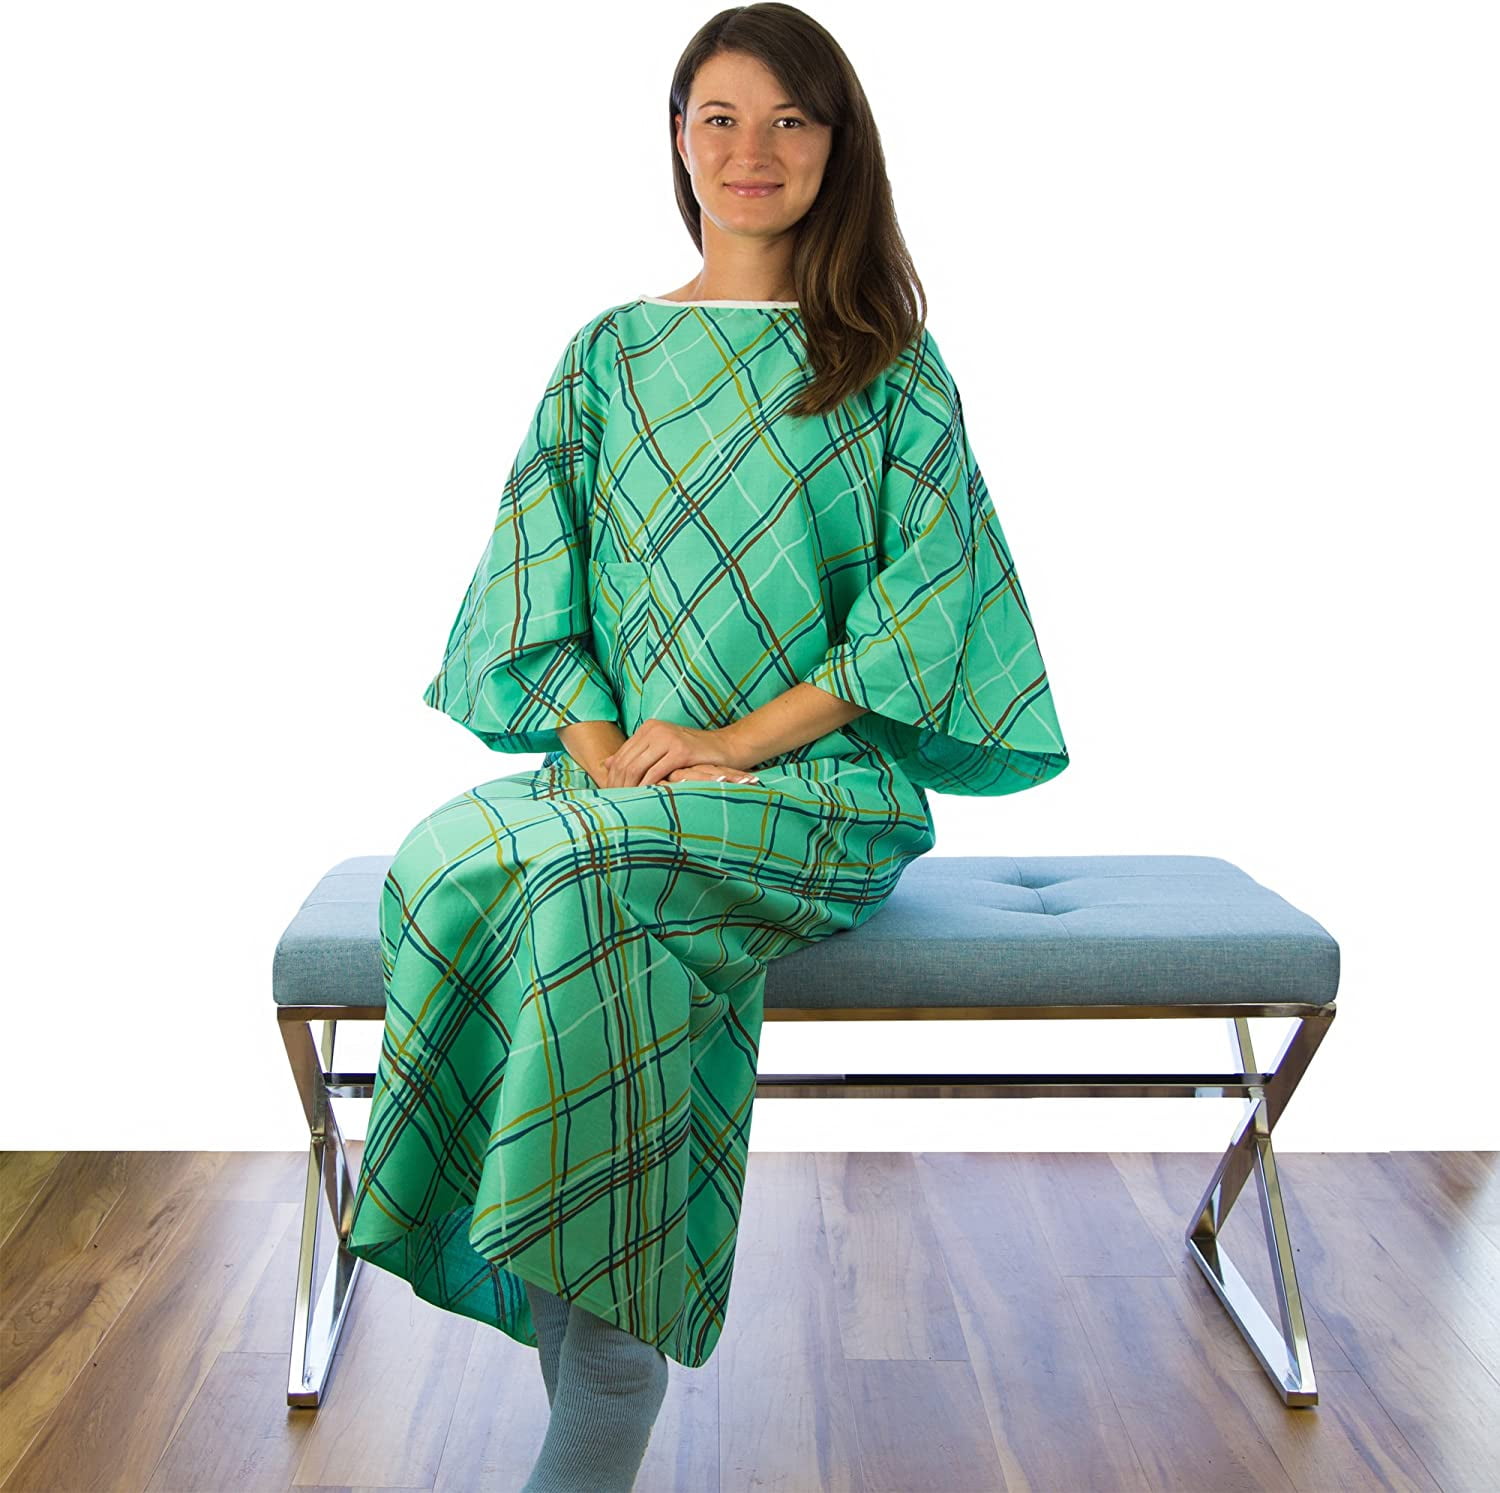 Green IV Hospital Gown IV Patient Gown W Telemetry Pocket Unisex Fits All Sizes up to 3XL d3ca9d31 c3bb 461c 80ee 414d74f10ddd.b30336853300098e50521aecd6e6821b